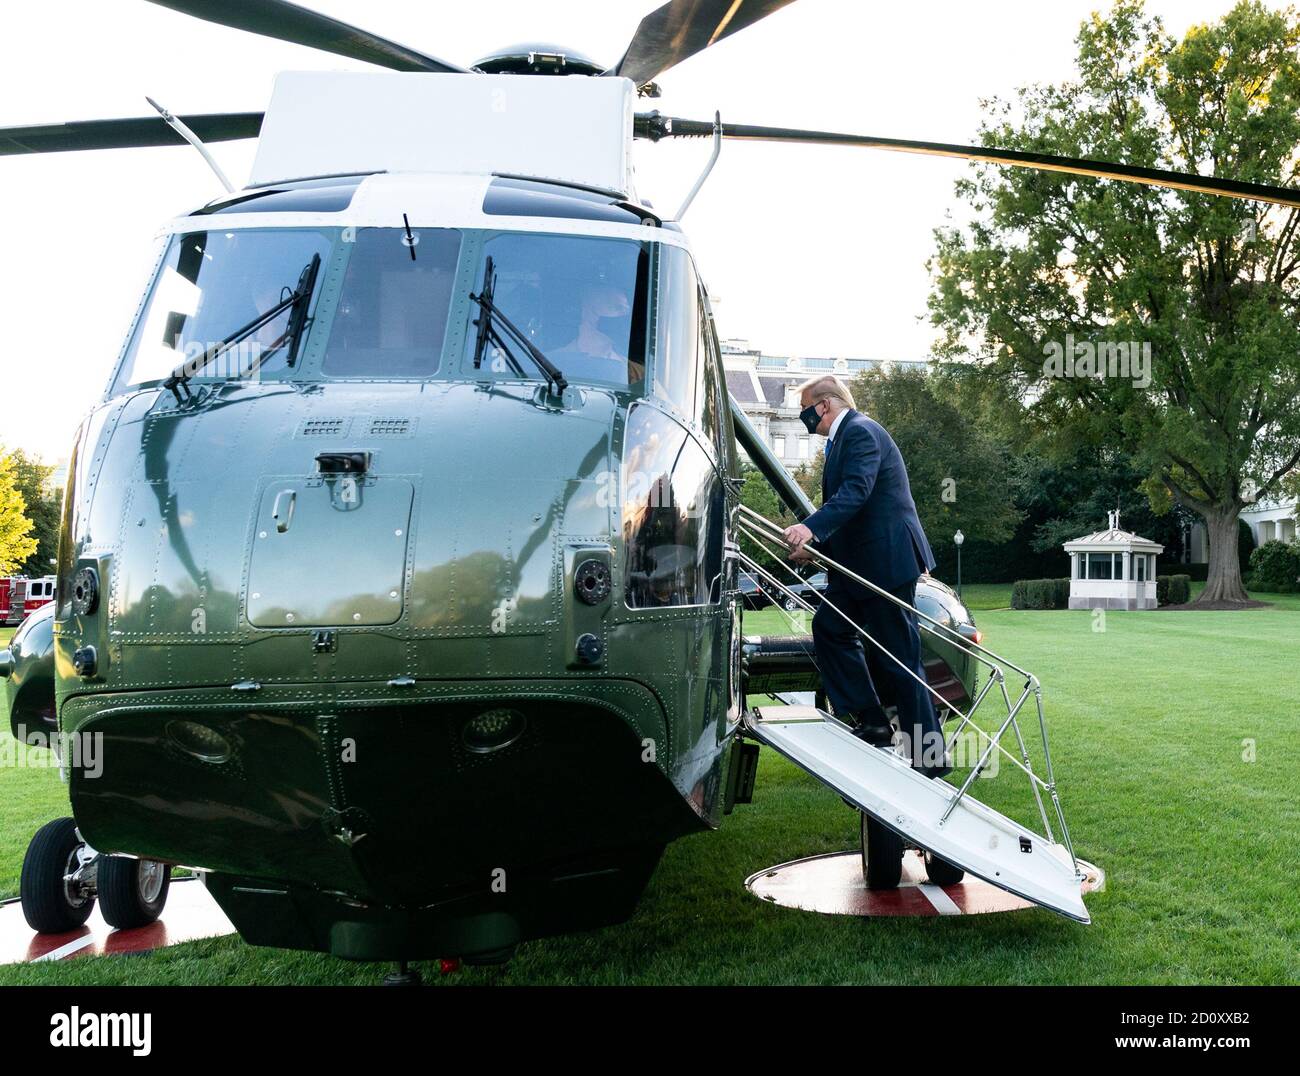 Washington, United States Of America. 02nd Oct, 2020. President Donald J. Trump boards Marine One on the South Lawn of the White House Friday, Oct. 2, 2020, en route to Walter Reed National Military Medical Center in Bethesda, Md. People: President Donald Trump Credit: Storms Media Group/Alamy Live News Stock Photo